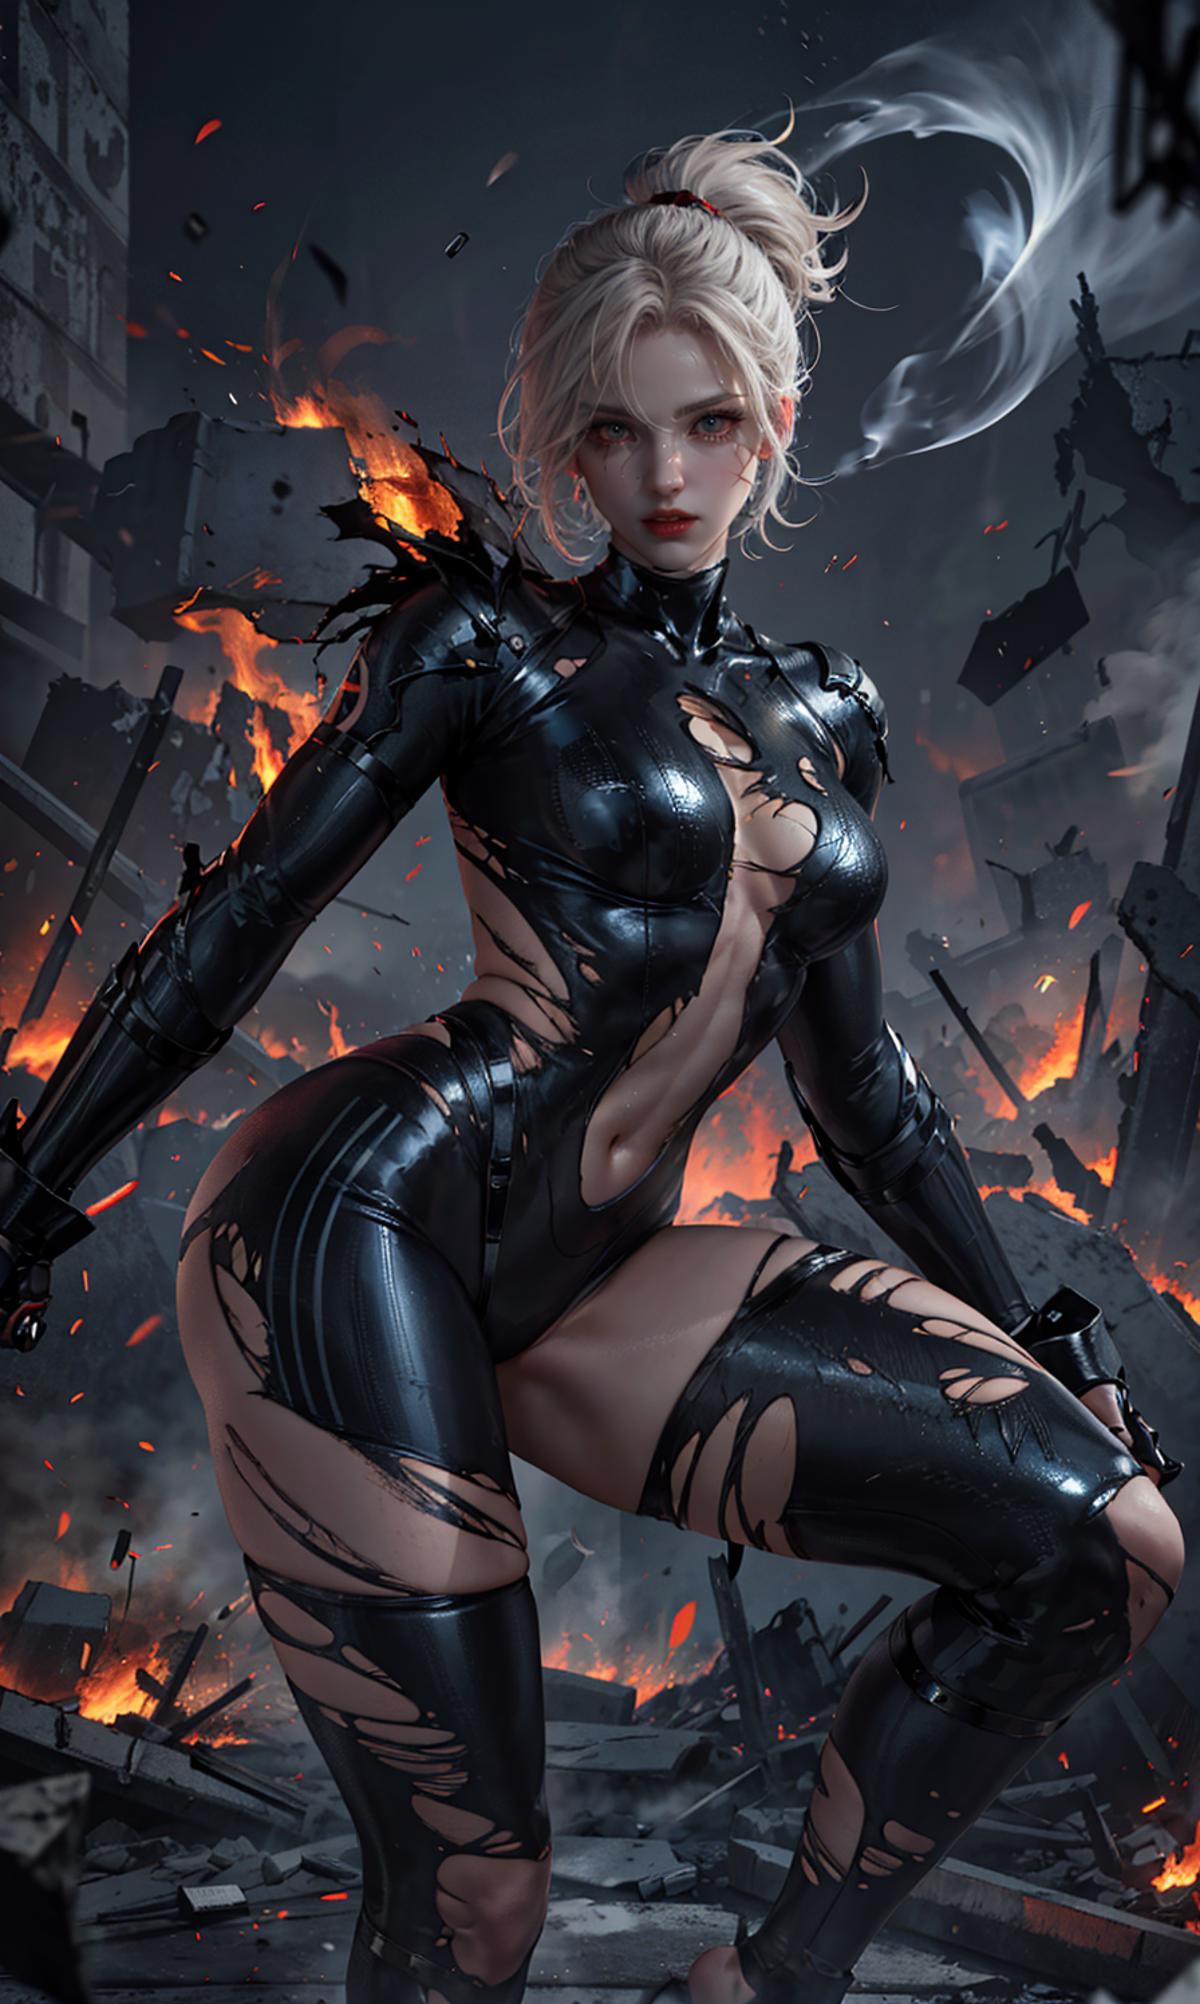 A sexy female character wearing a black bodysuit and high heels, posing in a futuristic setting with fire and destruction in the background.